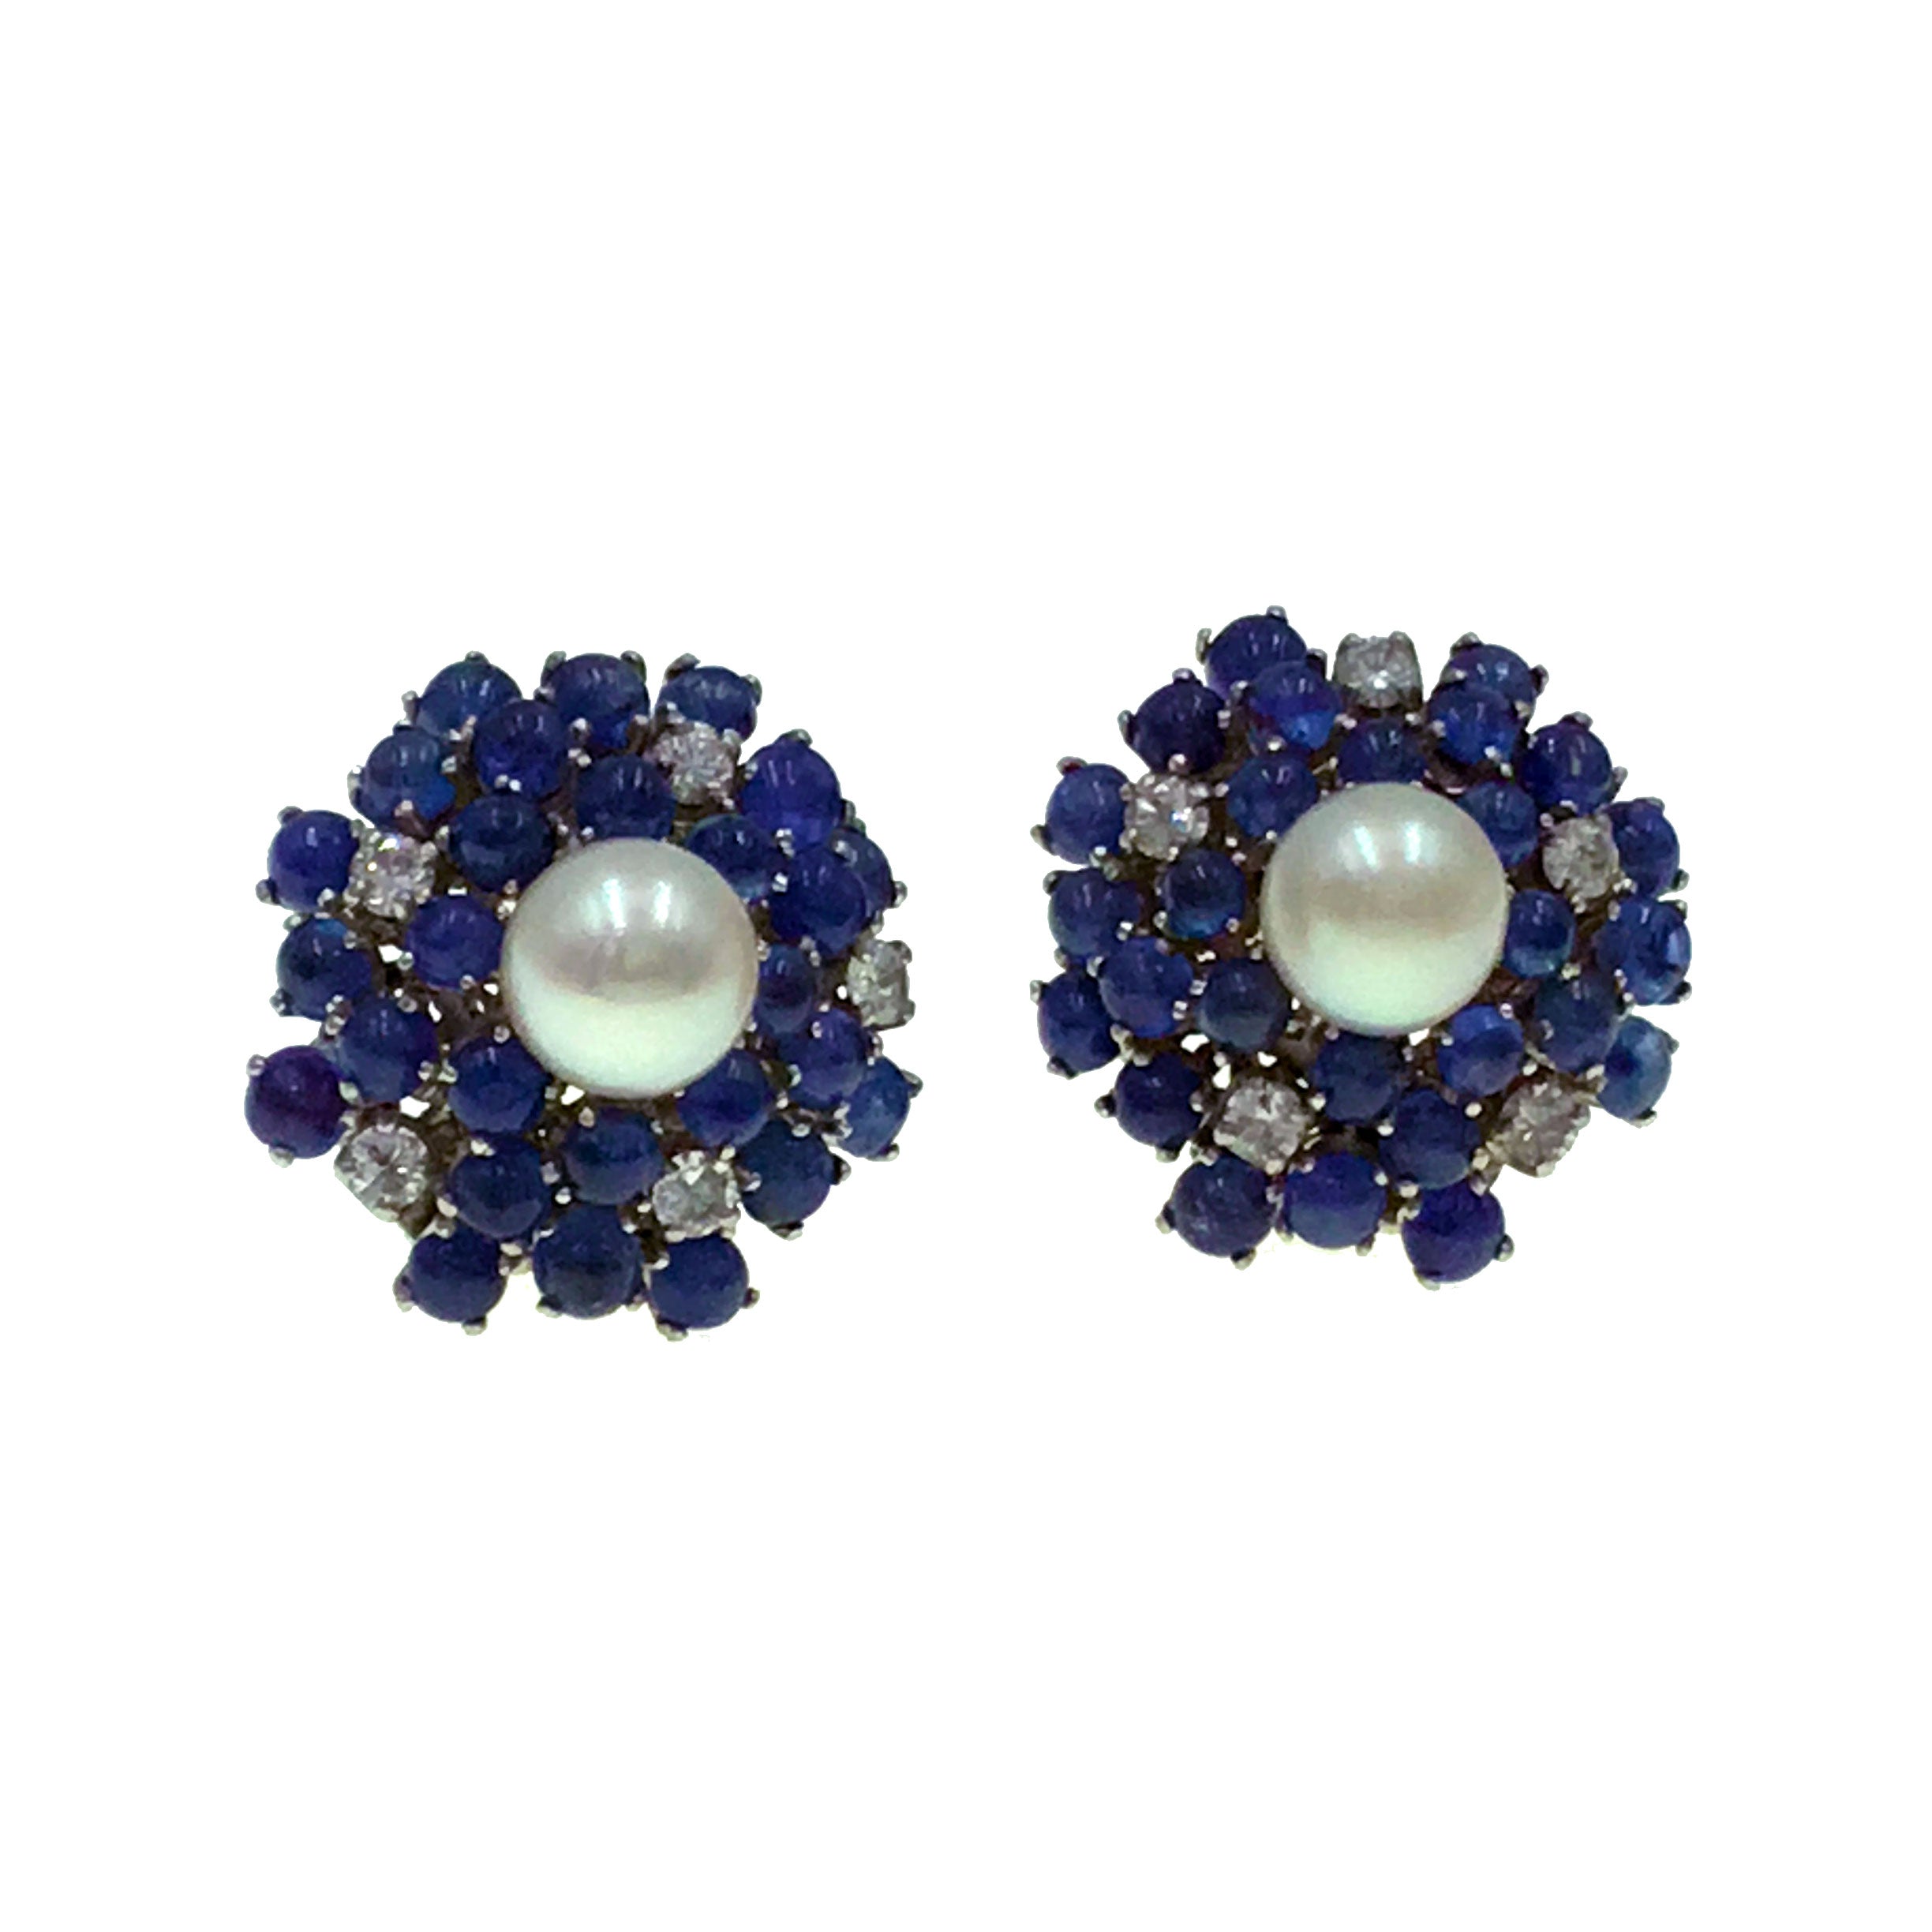 White Gold, Sapphire, Pearl and Diamond Earrings